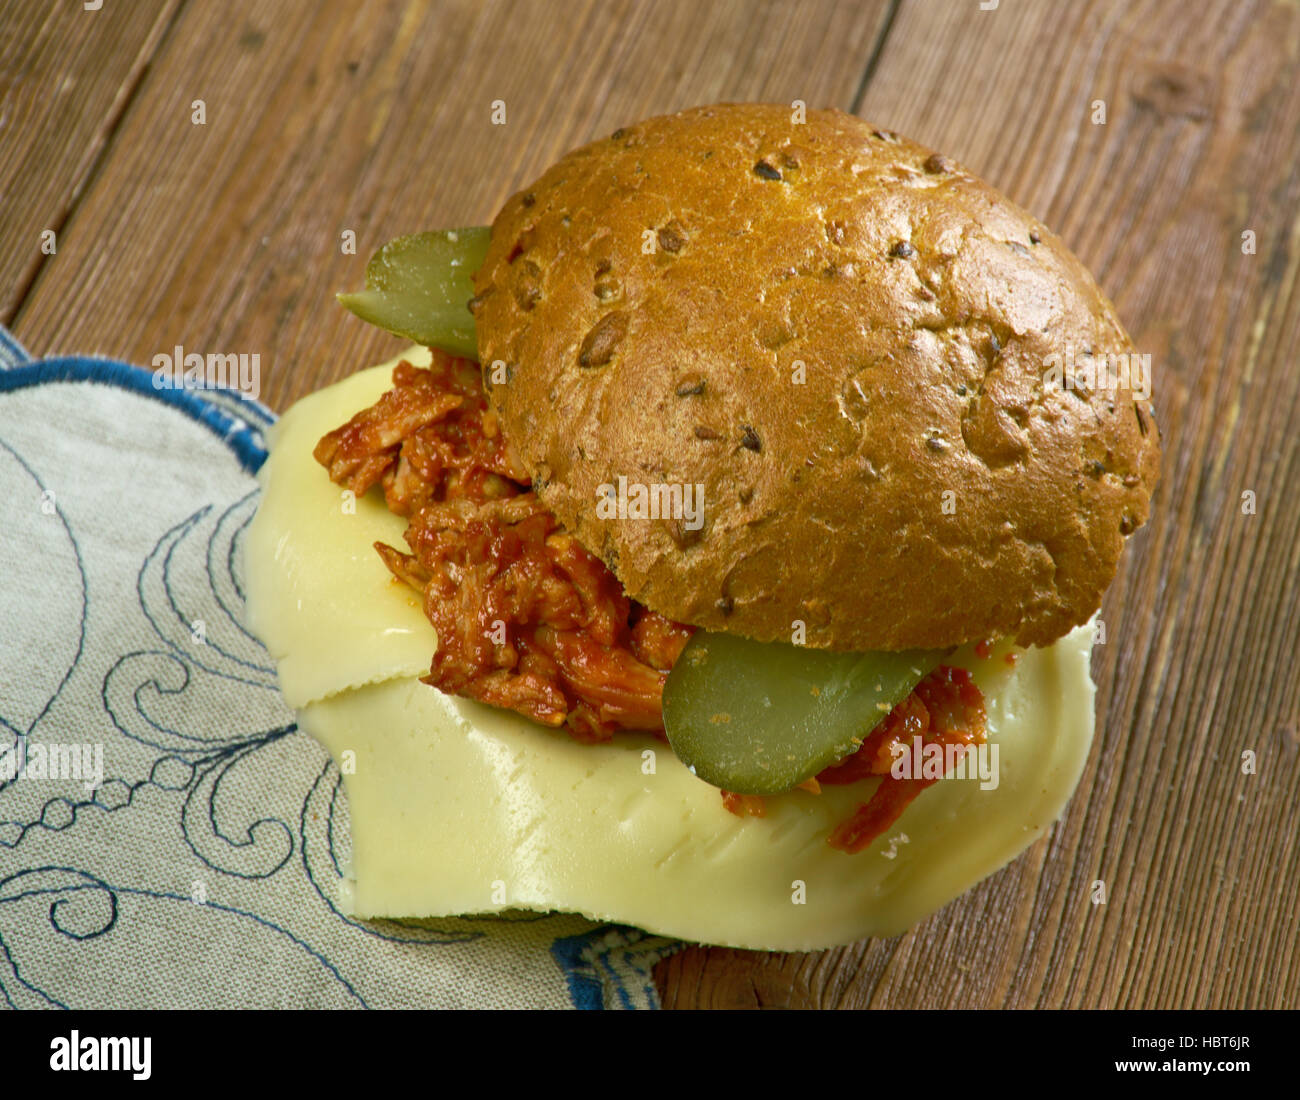 Tavern sandwich -  sandwich originally consisting of unseasoned ground beef on a bun, mixed with sauteed onions, and sometimes topped with pickles. Stock Photo